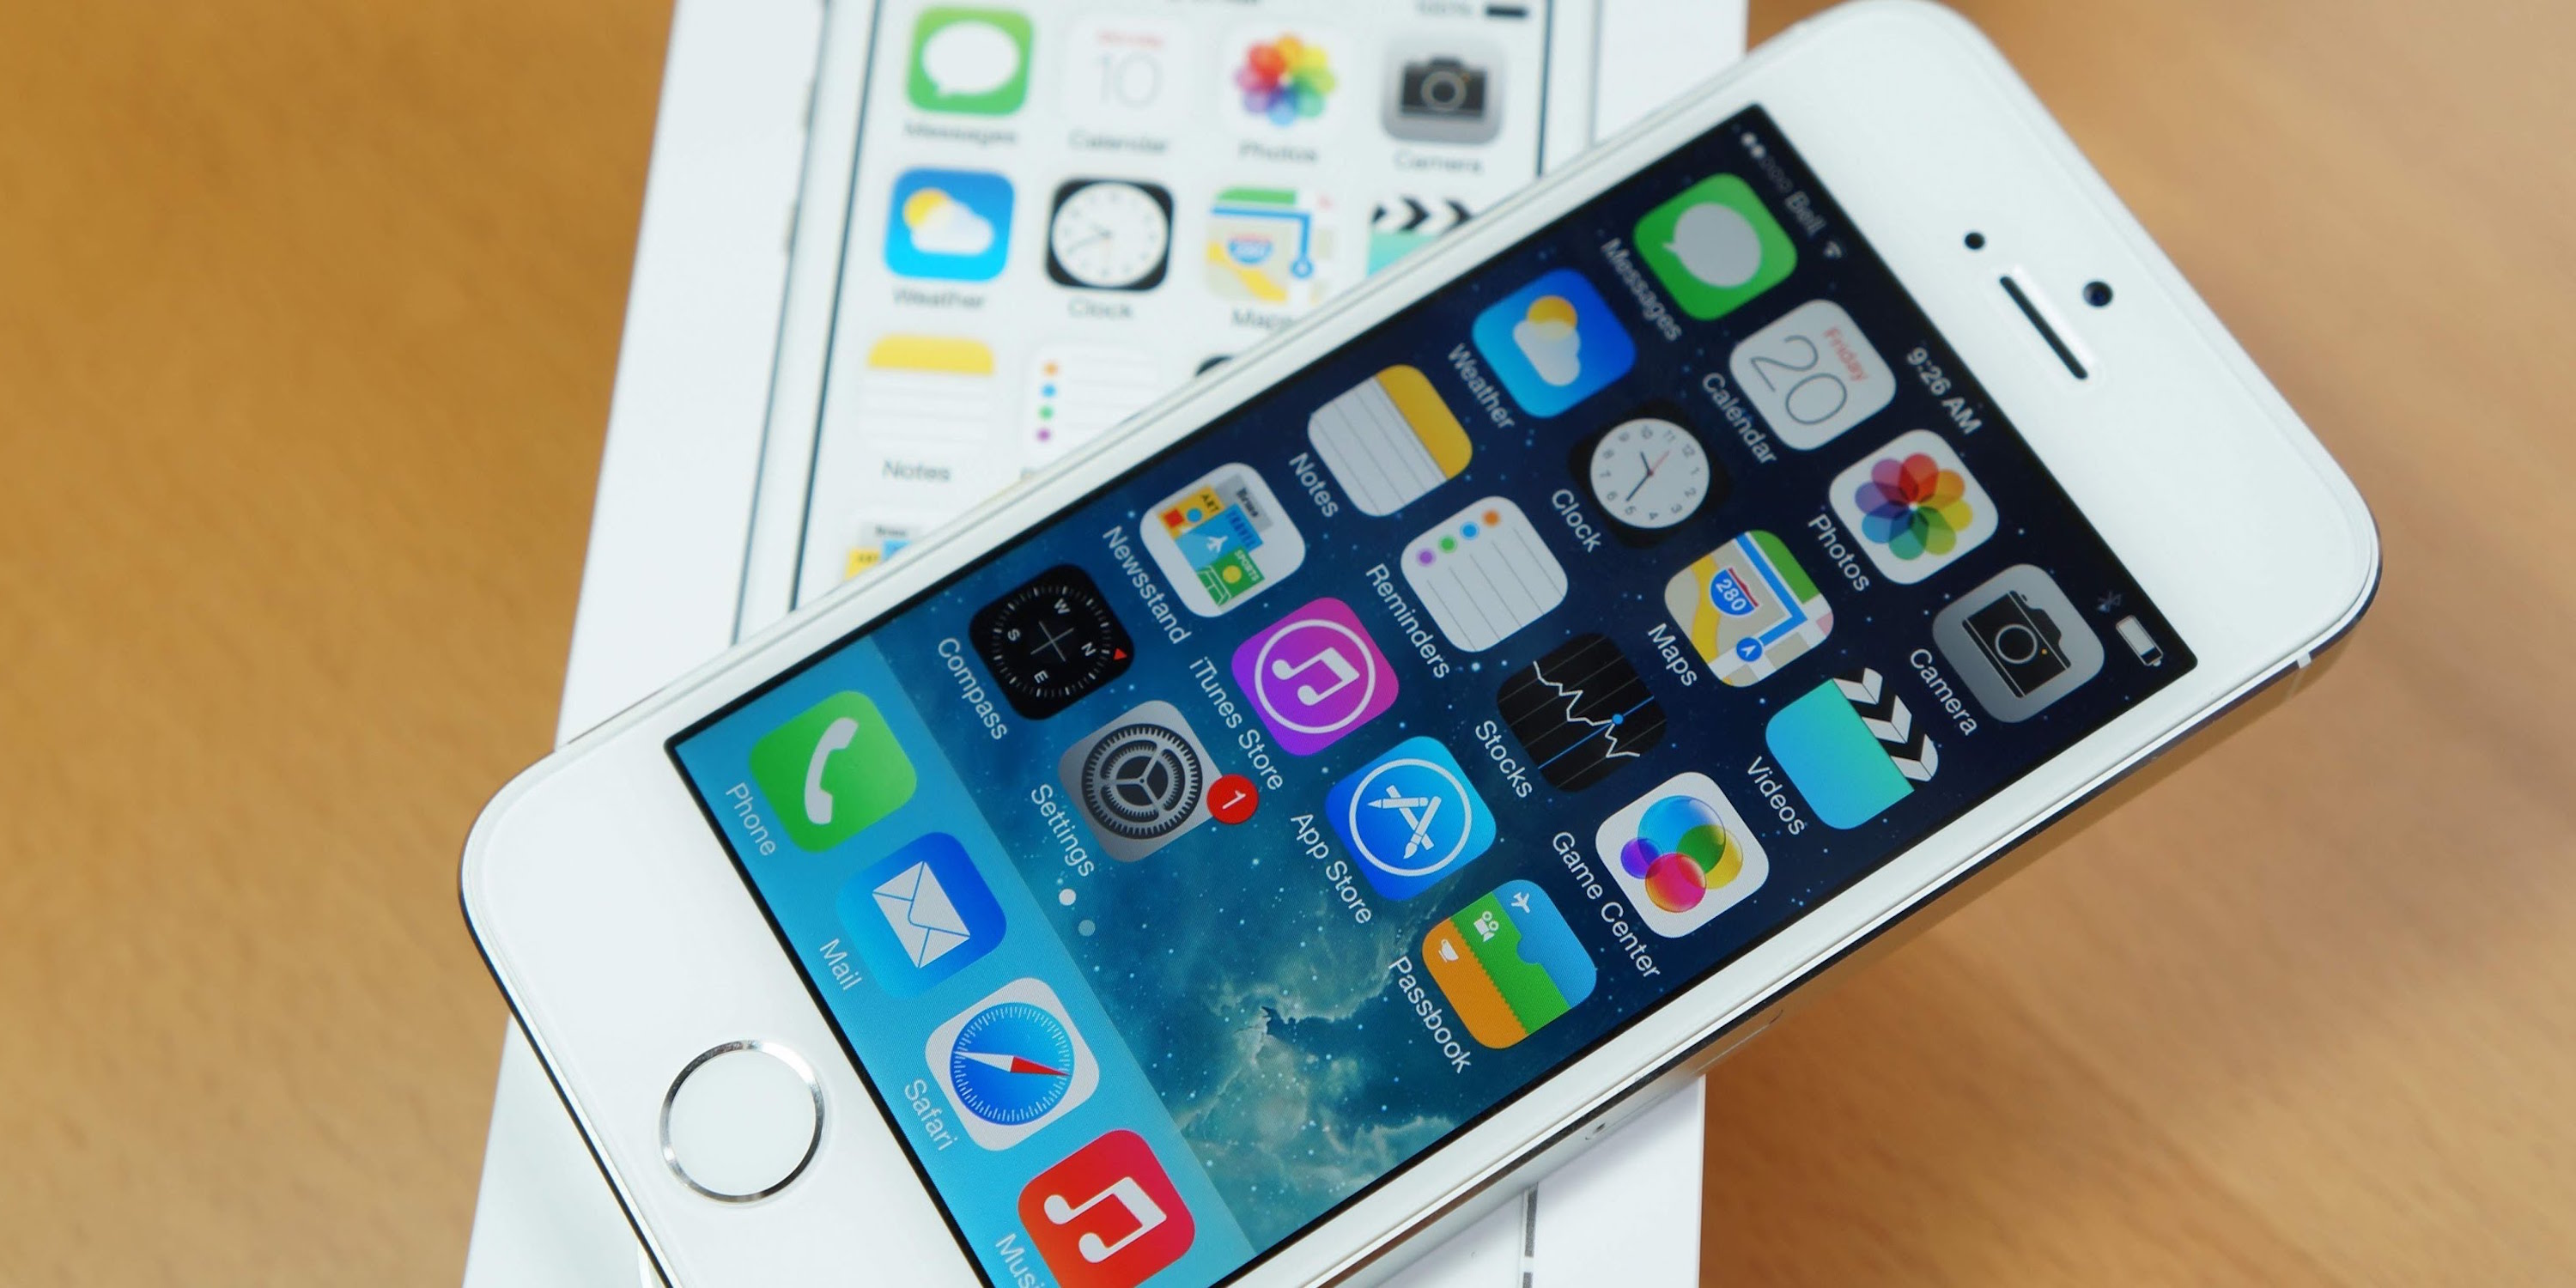 Apple Likely To Drop The 5 Call New 4 Inch Model The Iphone Se